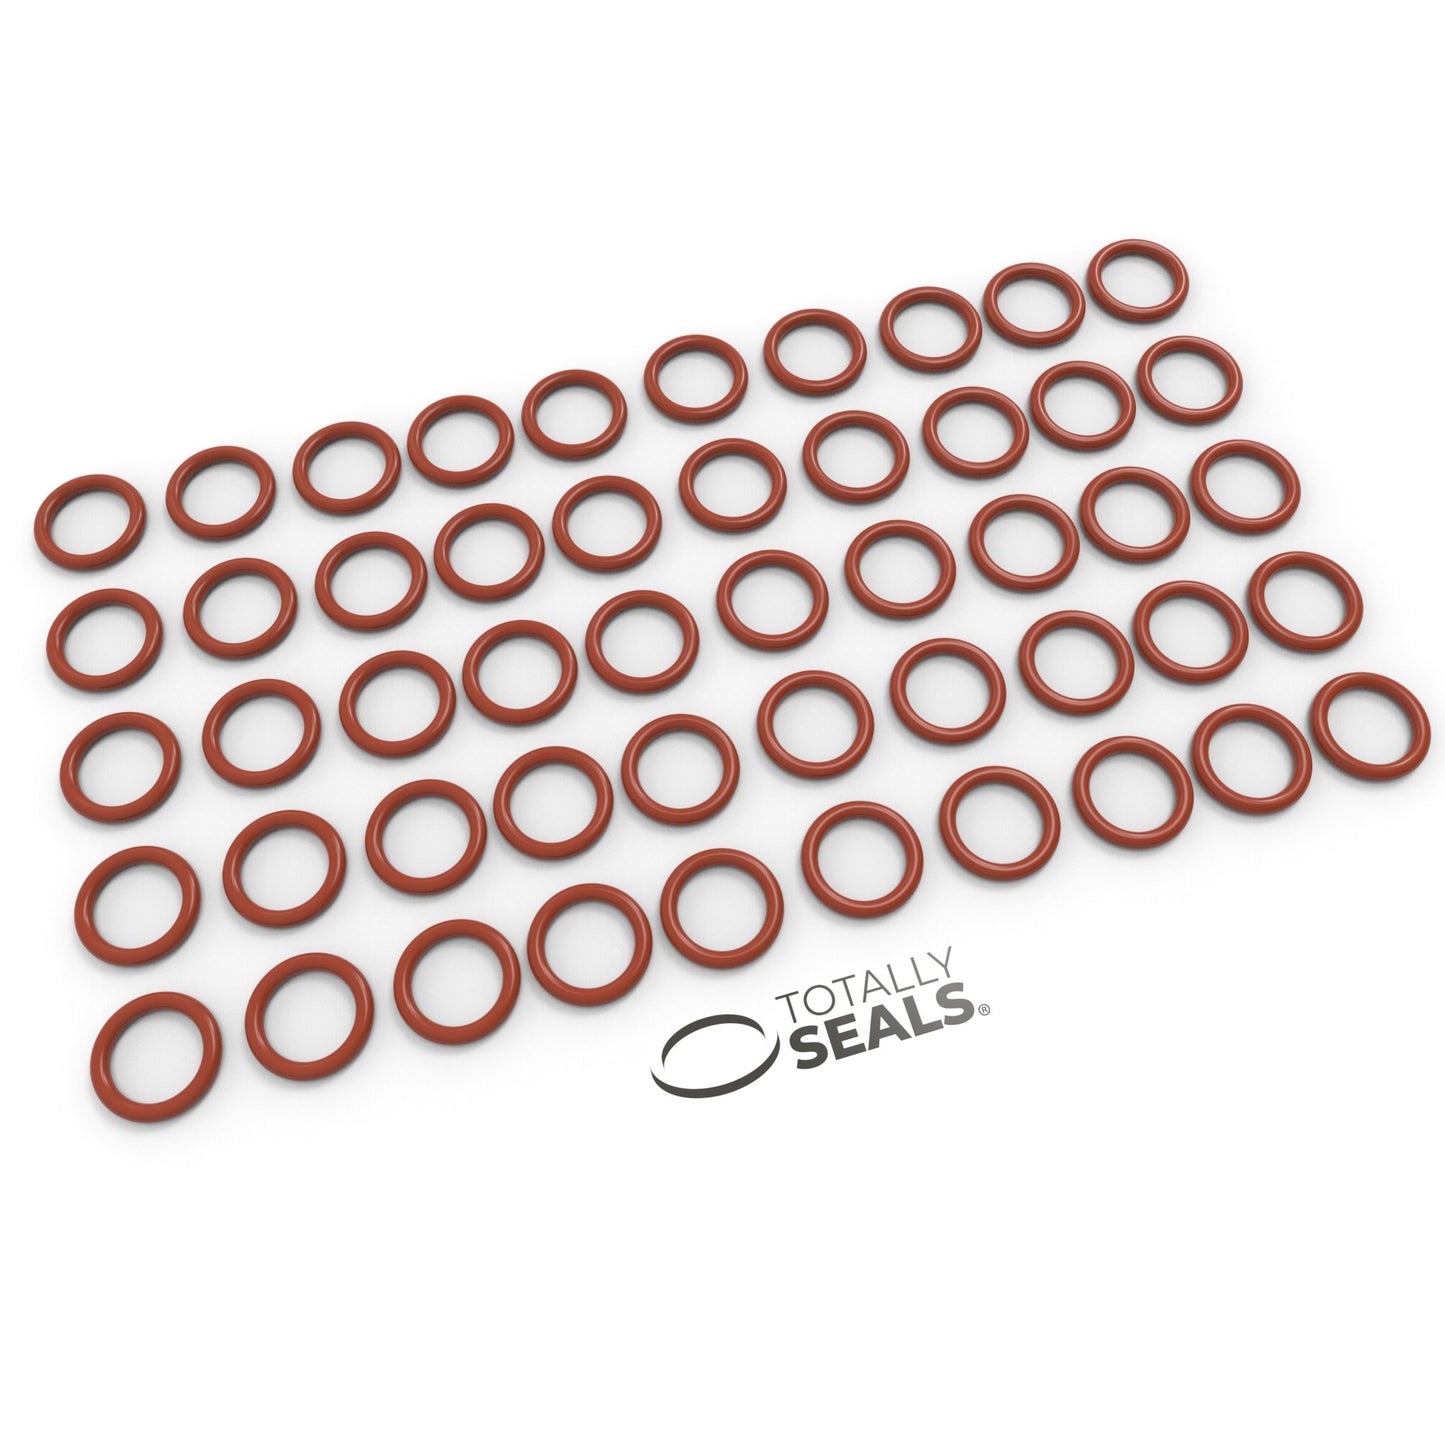 6mm x 3mm (12mm OD) Silicone O-Rings - Totally Seals®